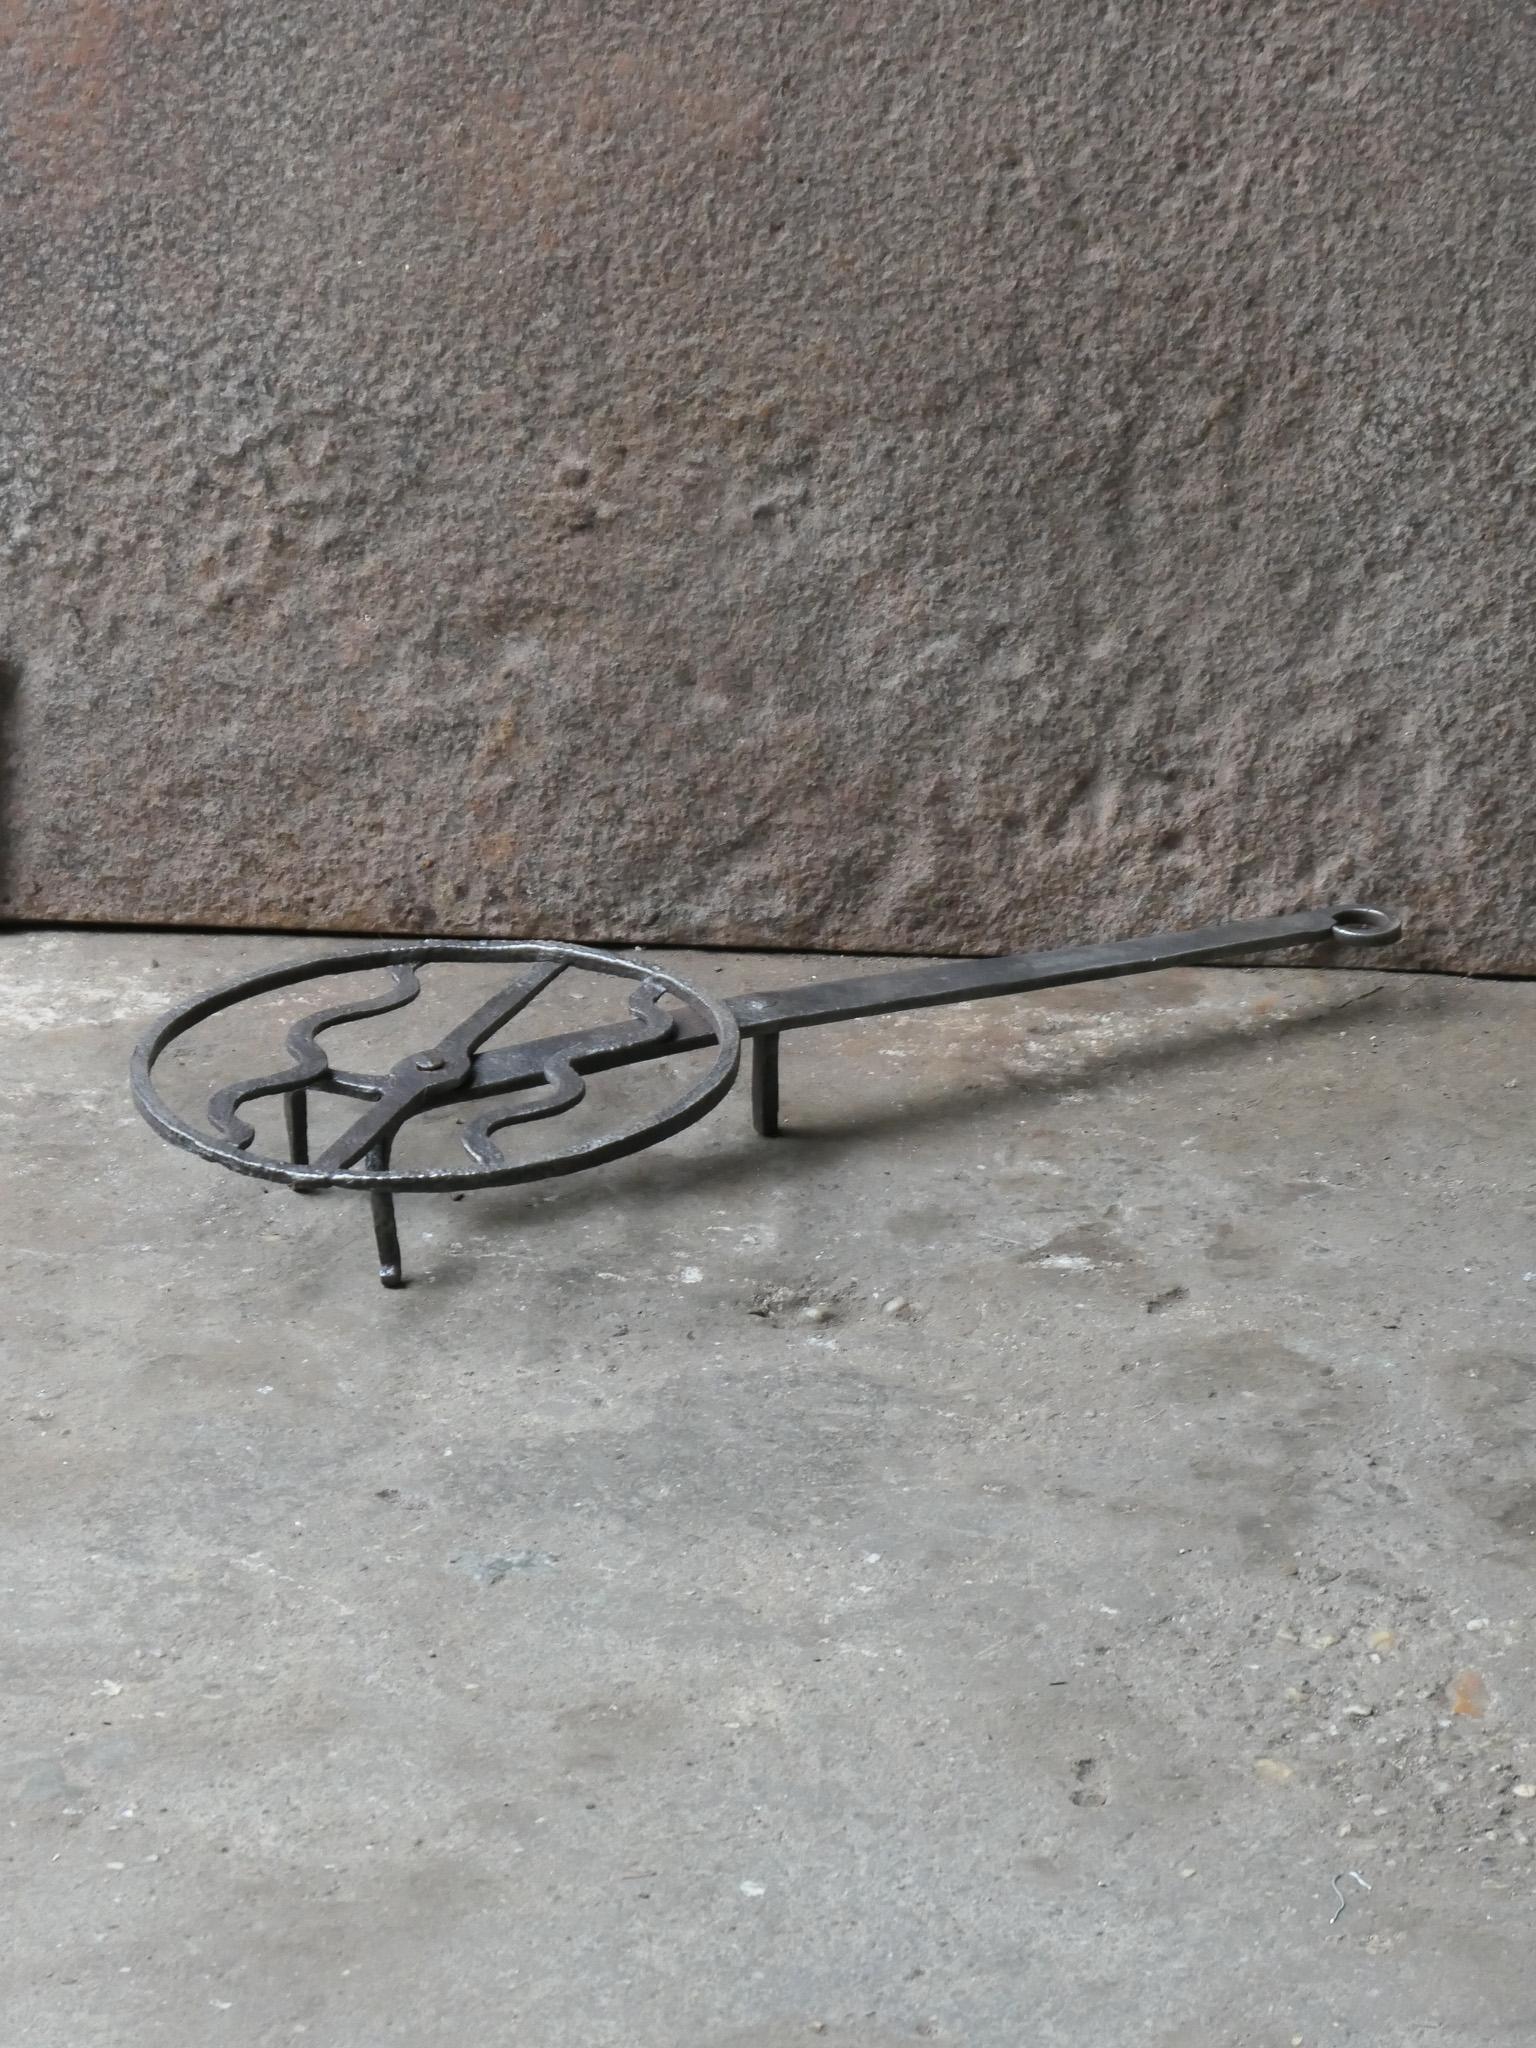 17th - 18th Century French Louis XV rotating gridiron made of wrought iron. It was used to prepare small pieces of meat quickly over the fire. Sometimes they were put in the fire or else on a trivet, depending on the size of the fire. The gridiron